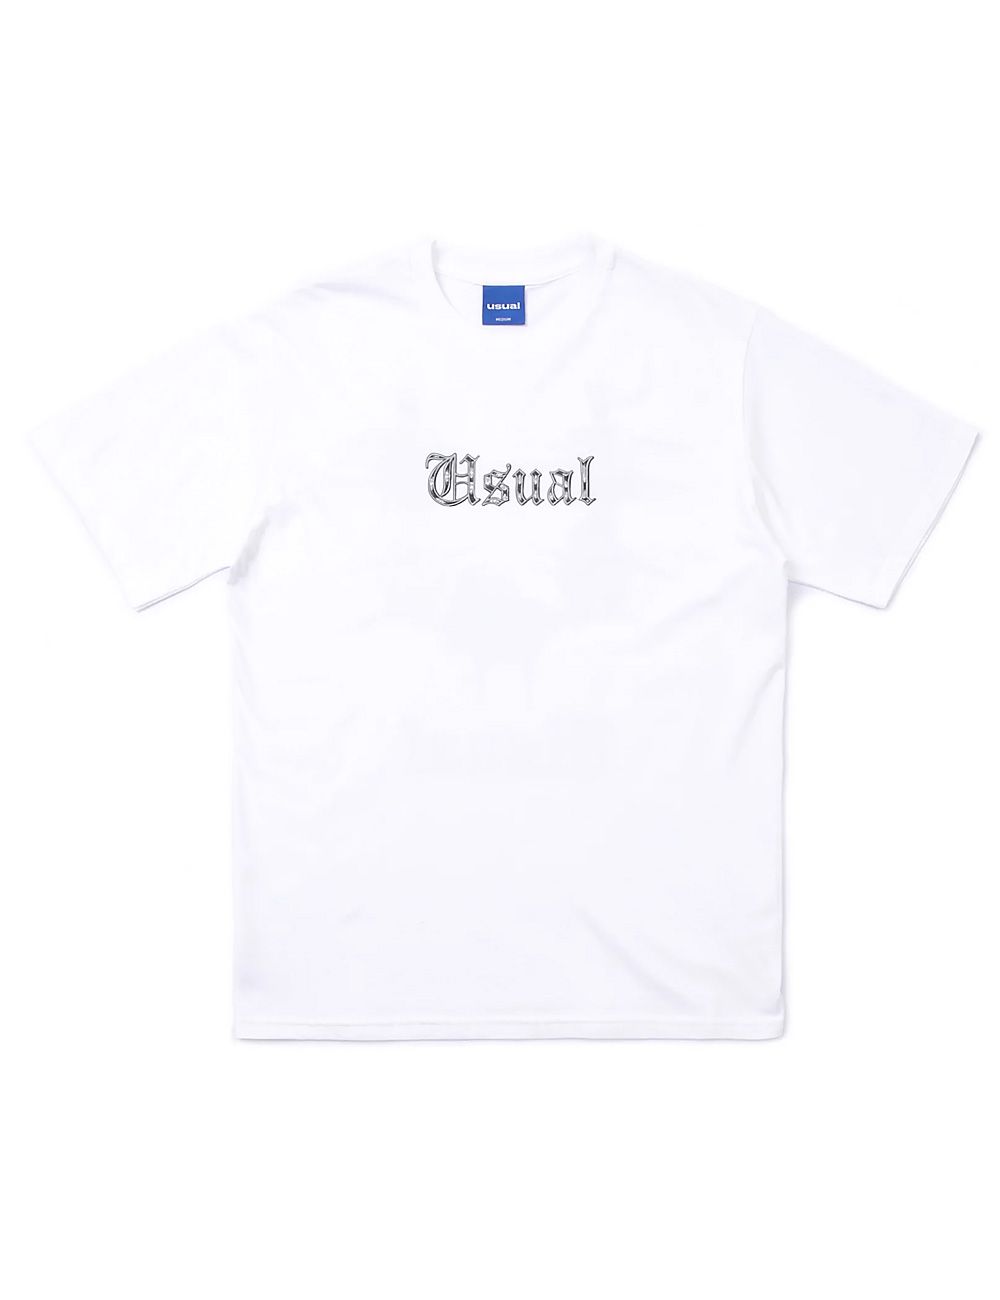 Usual BARRIO T-SHIRT white